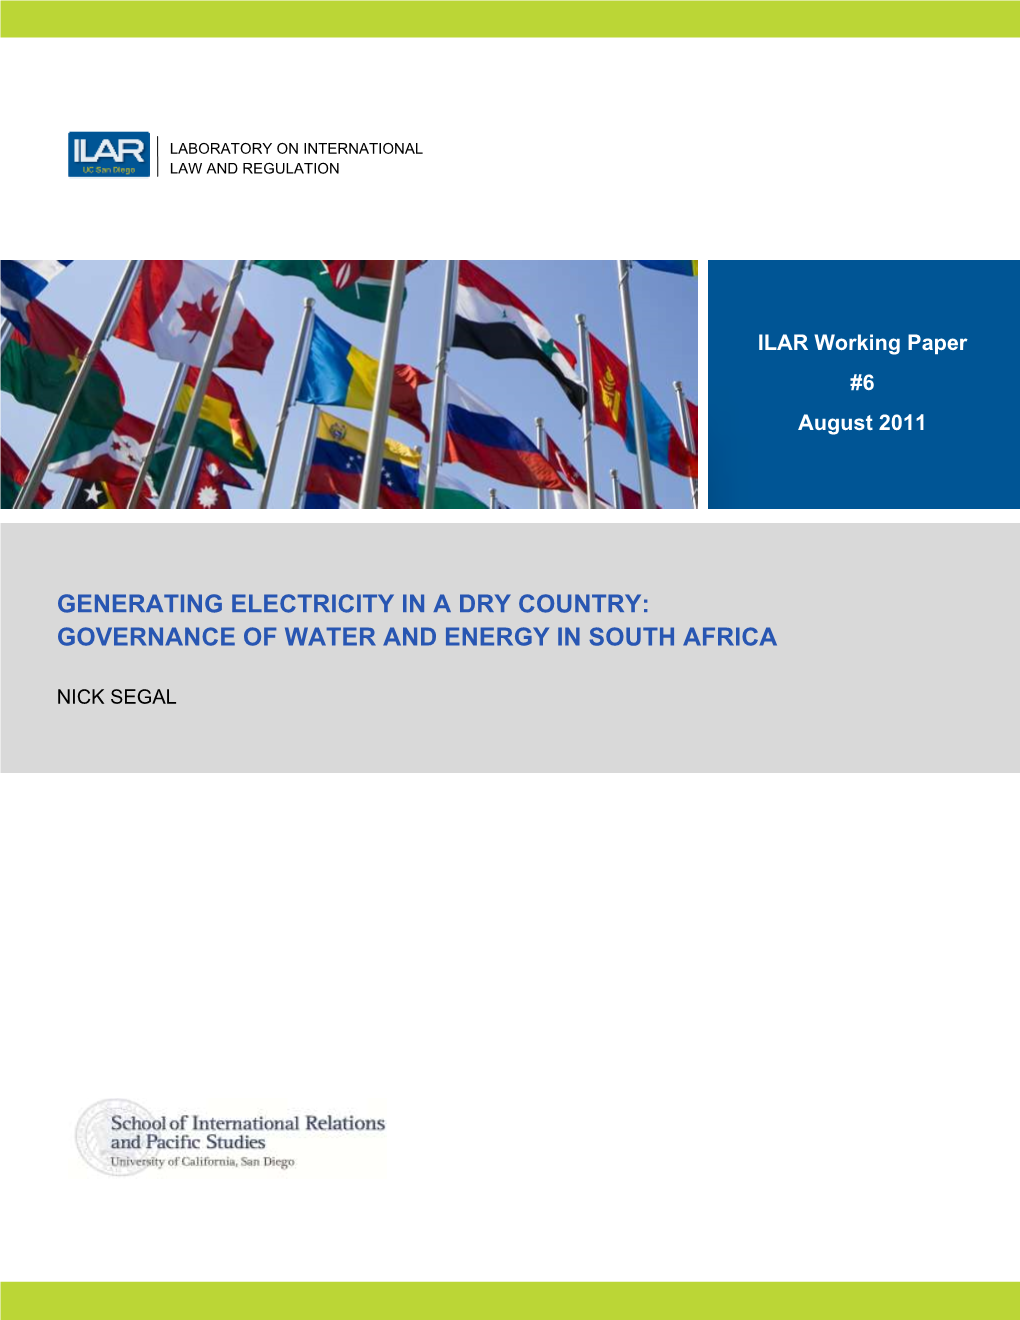 Generating Electricity in a Dry Country: Governance of Water and Energy in South Africa